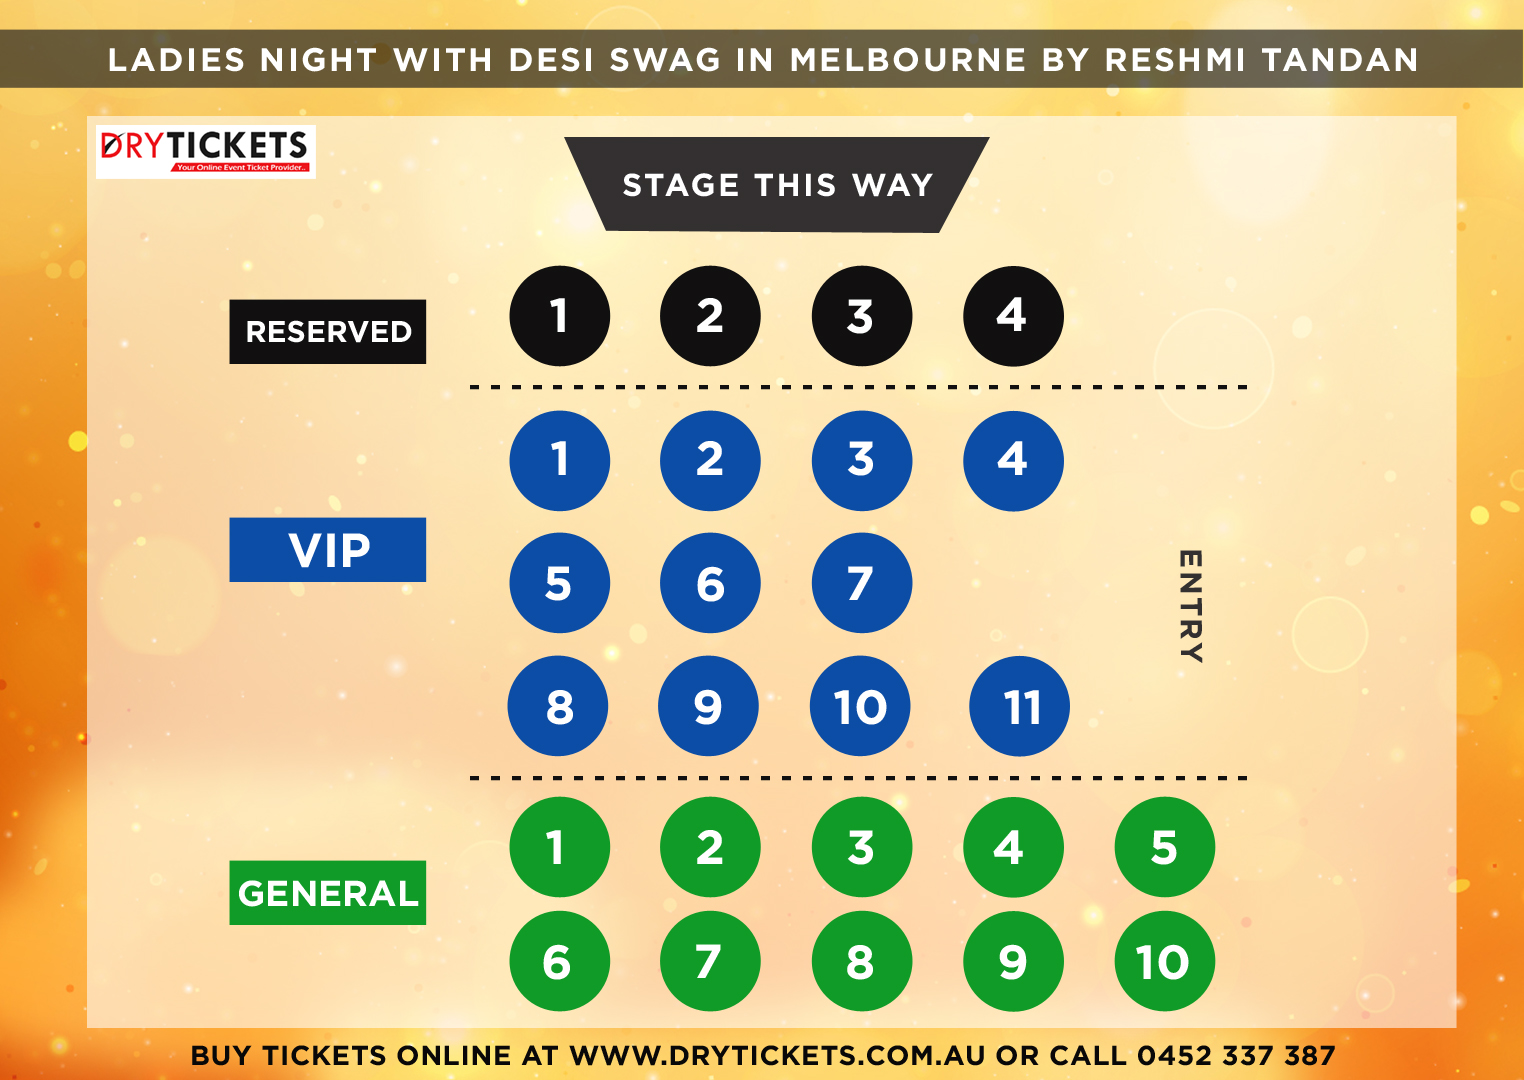 Ladies Night with Desi Swag In Melbourne by Reshmi Tandan Seating Map